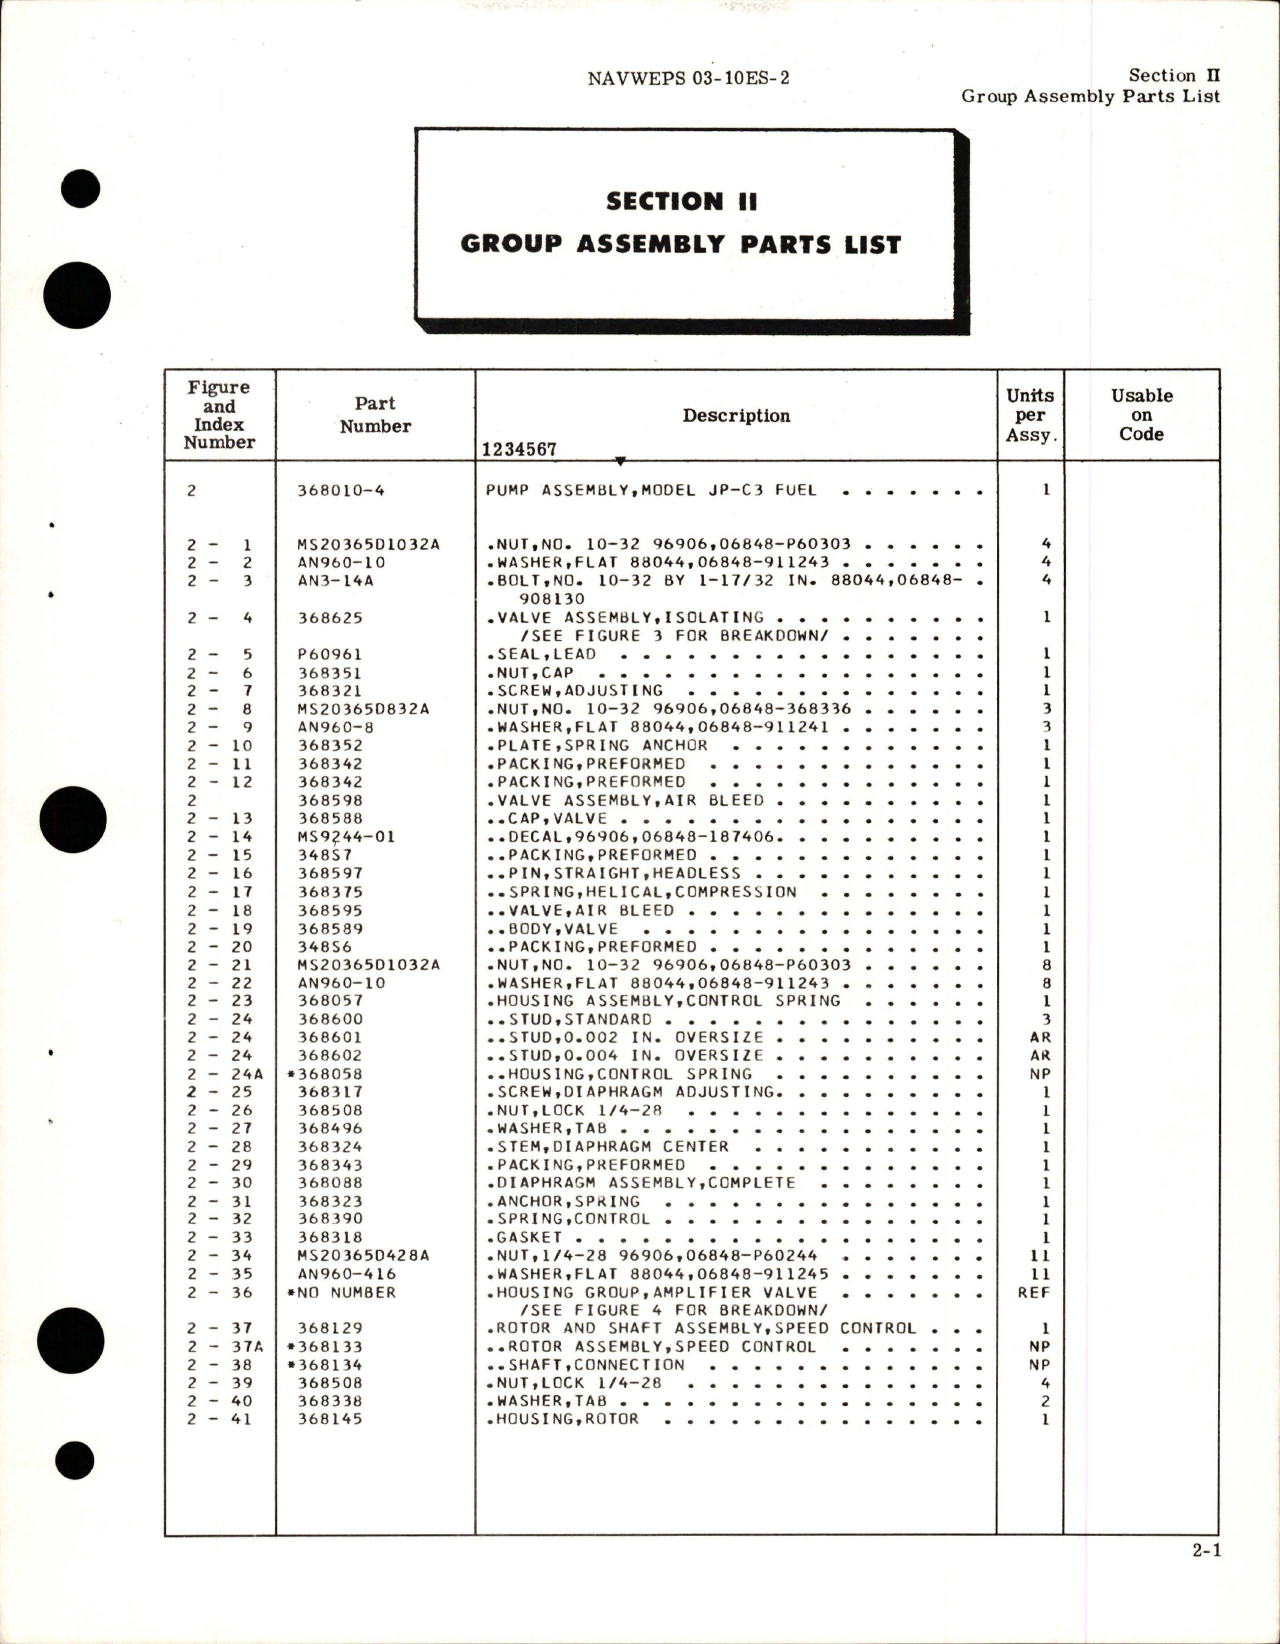 Sample page 7 from AirCorps Library document: Illustrated Parts Breakdown for Fuel Pump - Model JP-C3 - Parts List 368010-